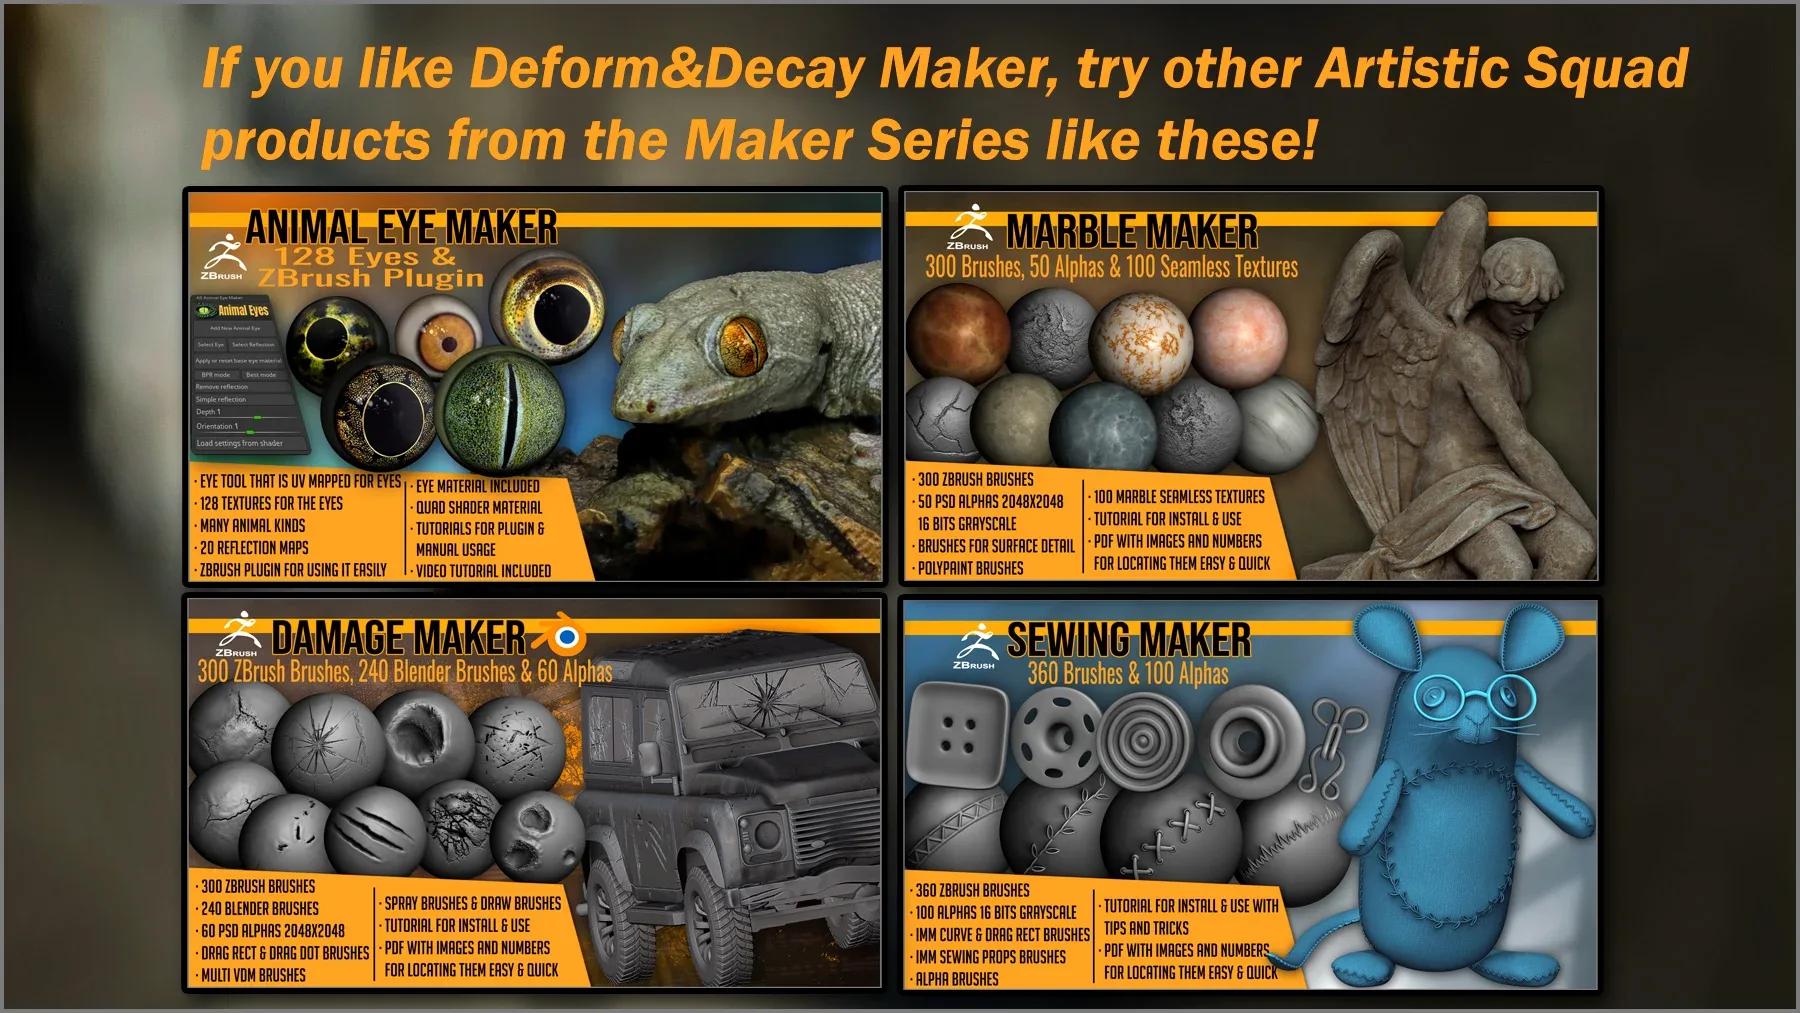 Deform And Decay Maker: 300 ZBrush Brushes And 60 Alphas